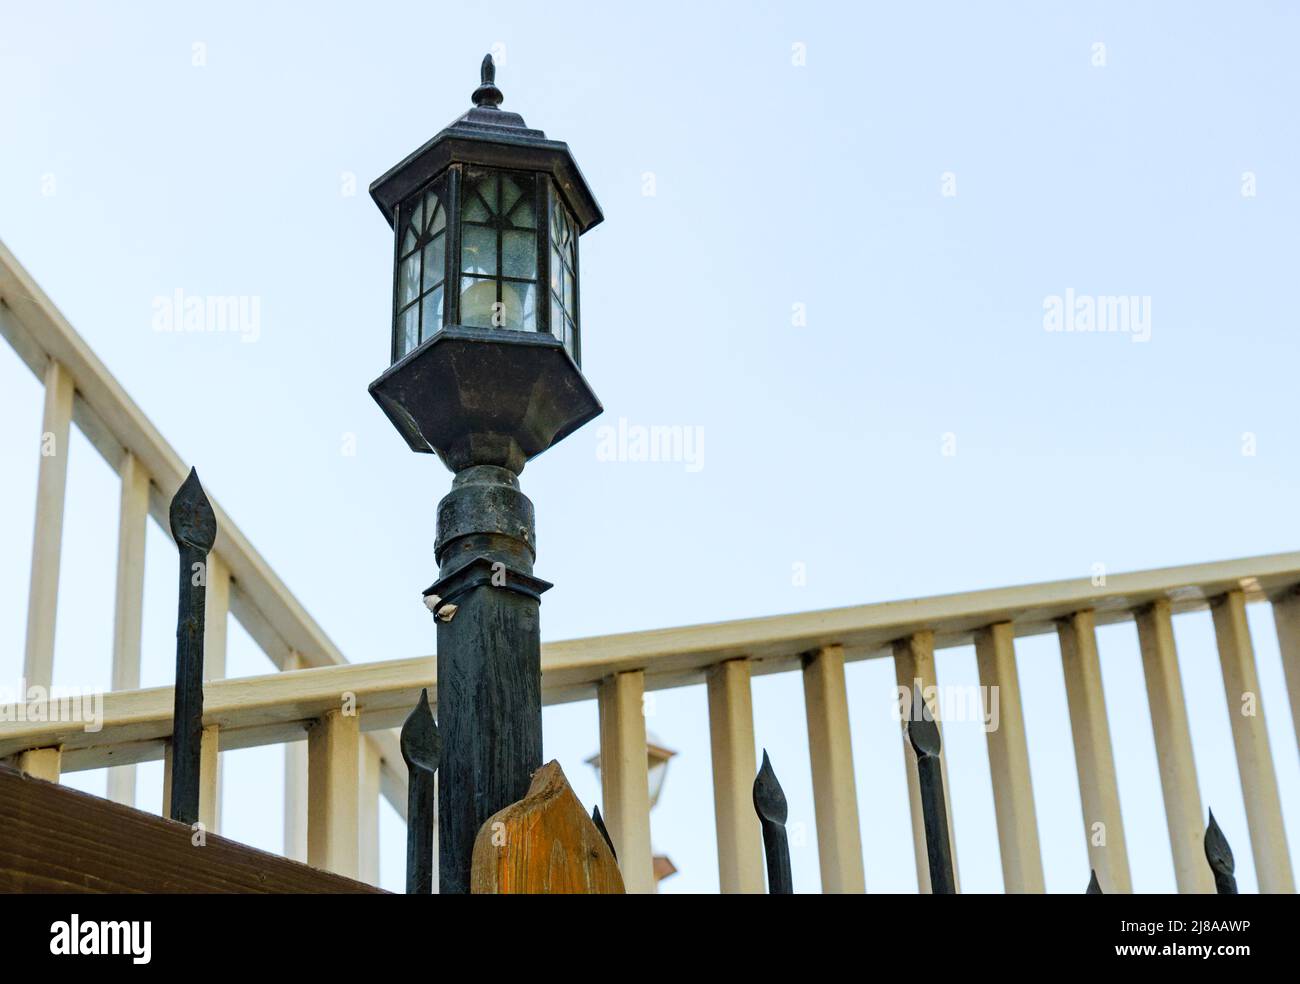 An old-fashioned street lamp on a metal fence. Summer day. Stock Photo